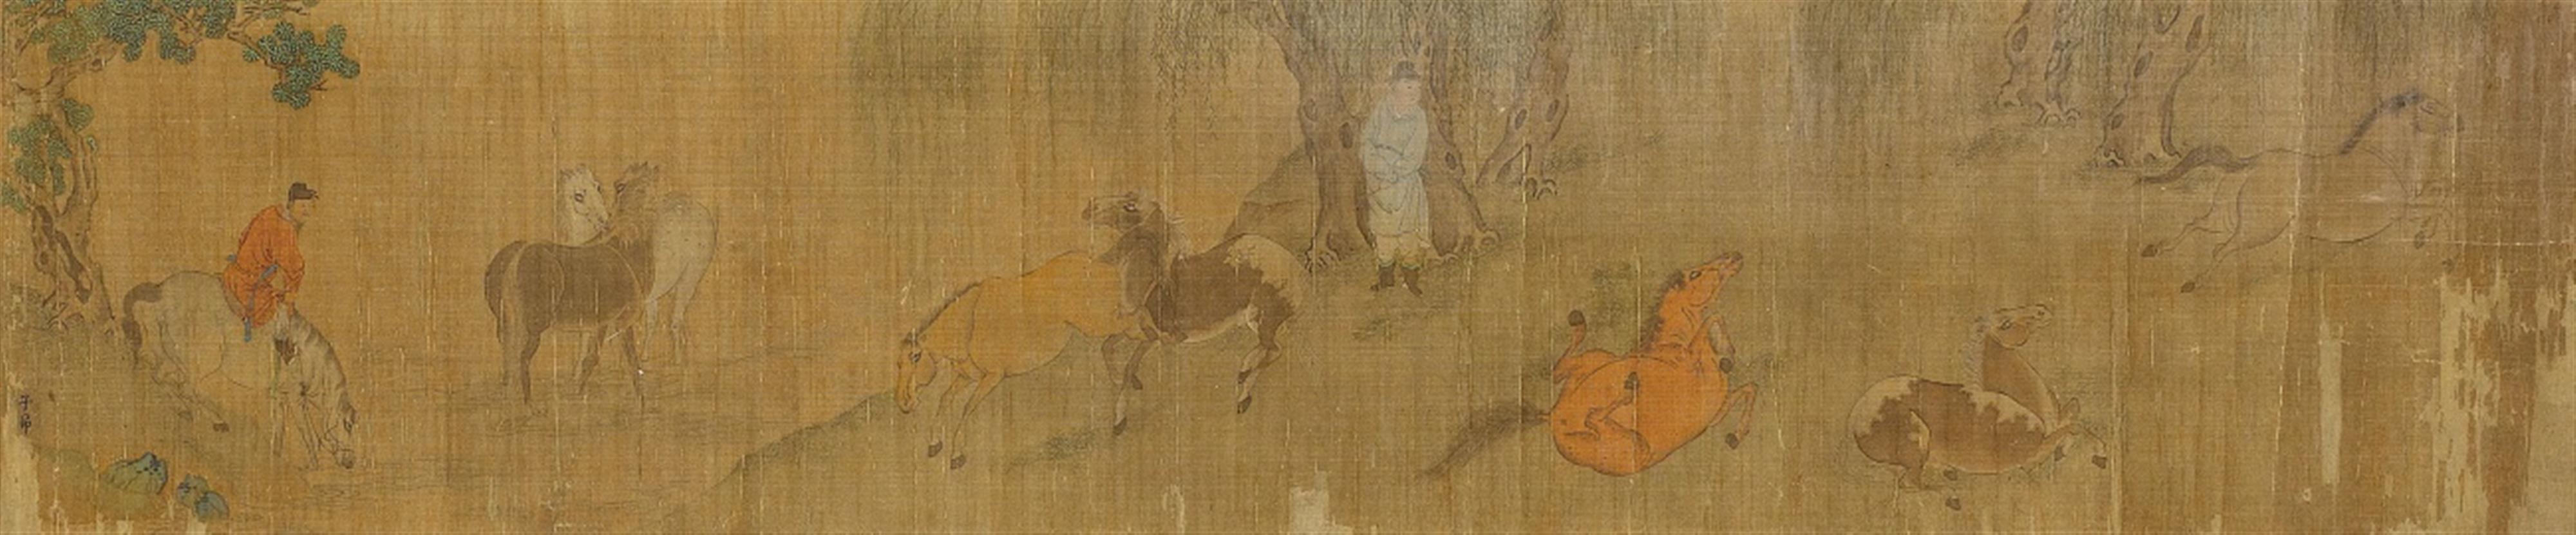 Zhao Mengfu, in the manner of. Qing dynasty - Eight Horses of Emperor Mu Wang in the manner of Zhao Mengfu. Horizontal scroll. Ink and colour on silk. Inscribed Zi'ang. Qing dynasty. - image-1